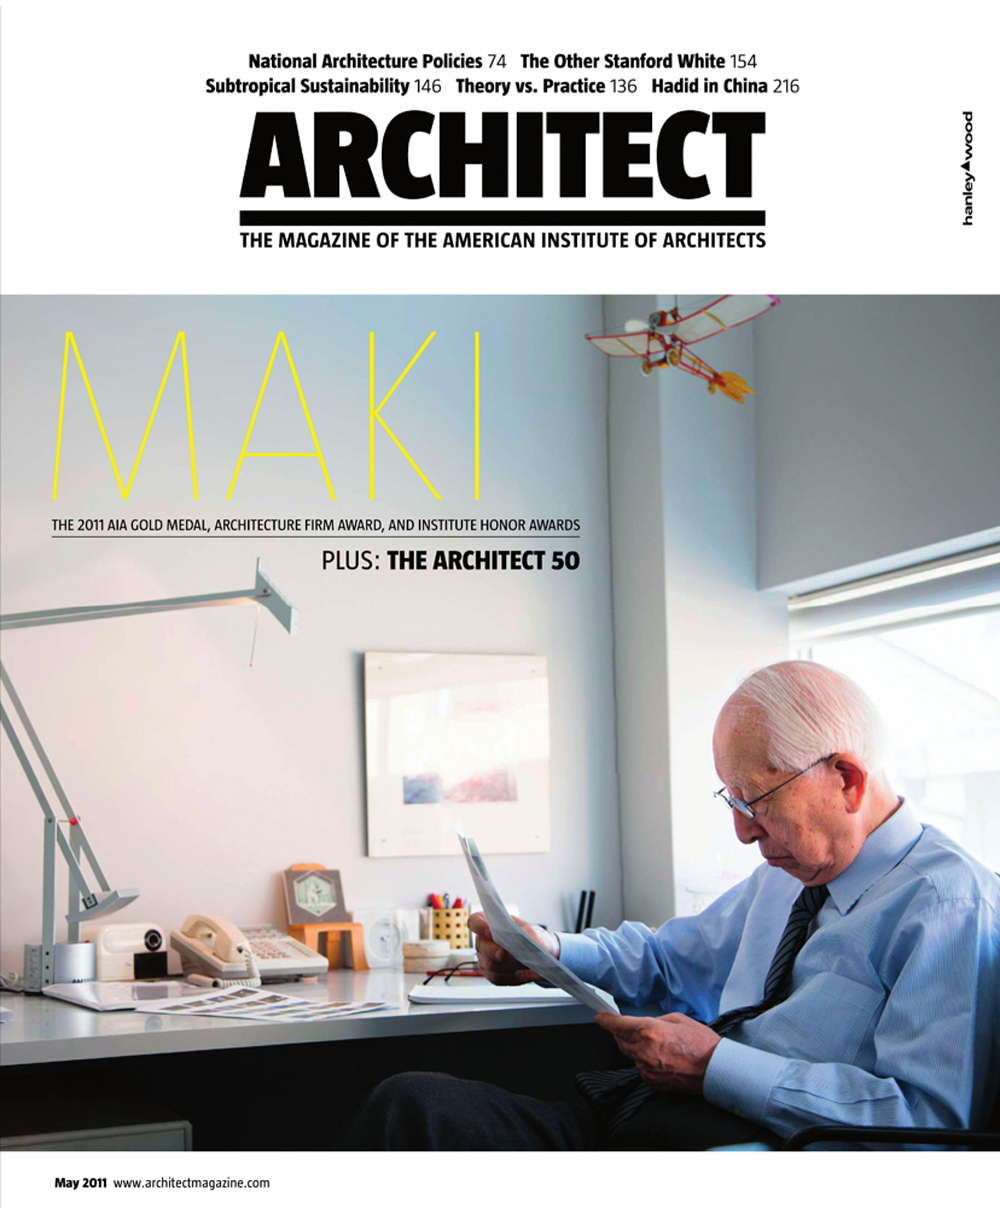 ARCHITECT Magazine names ikon.5 architects in its Top Ten